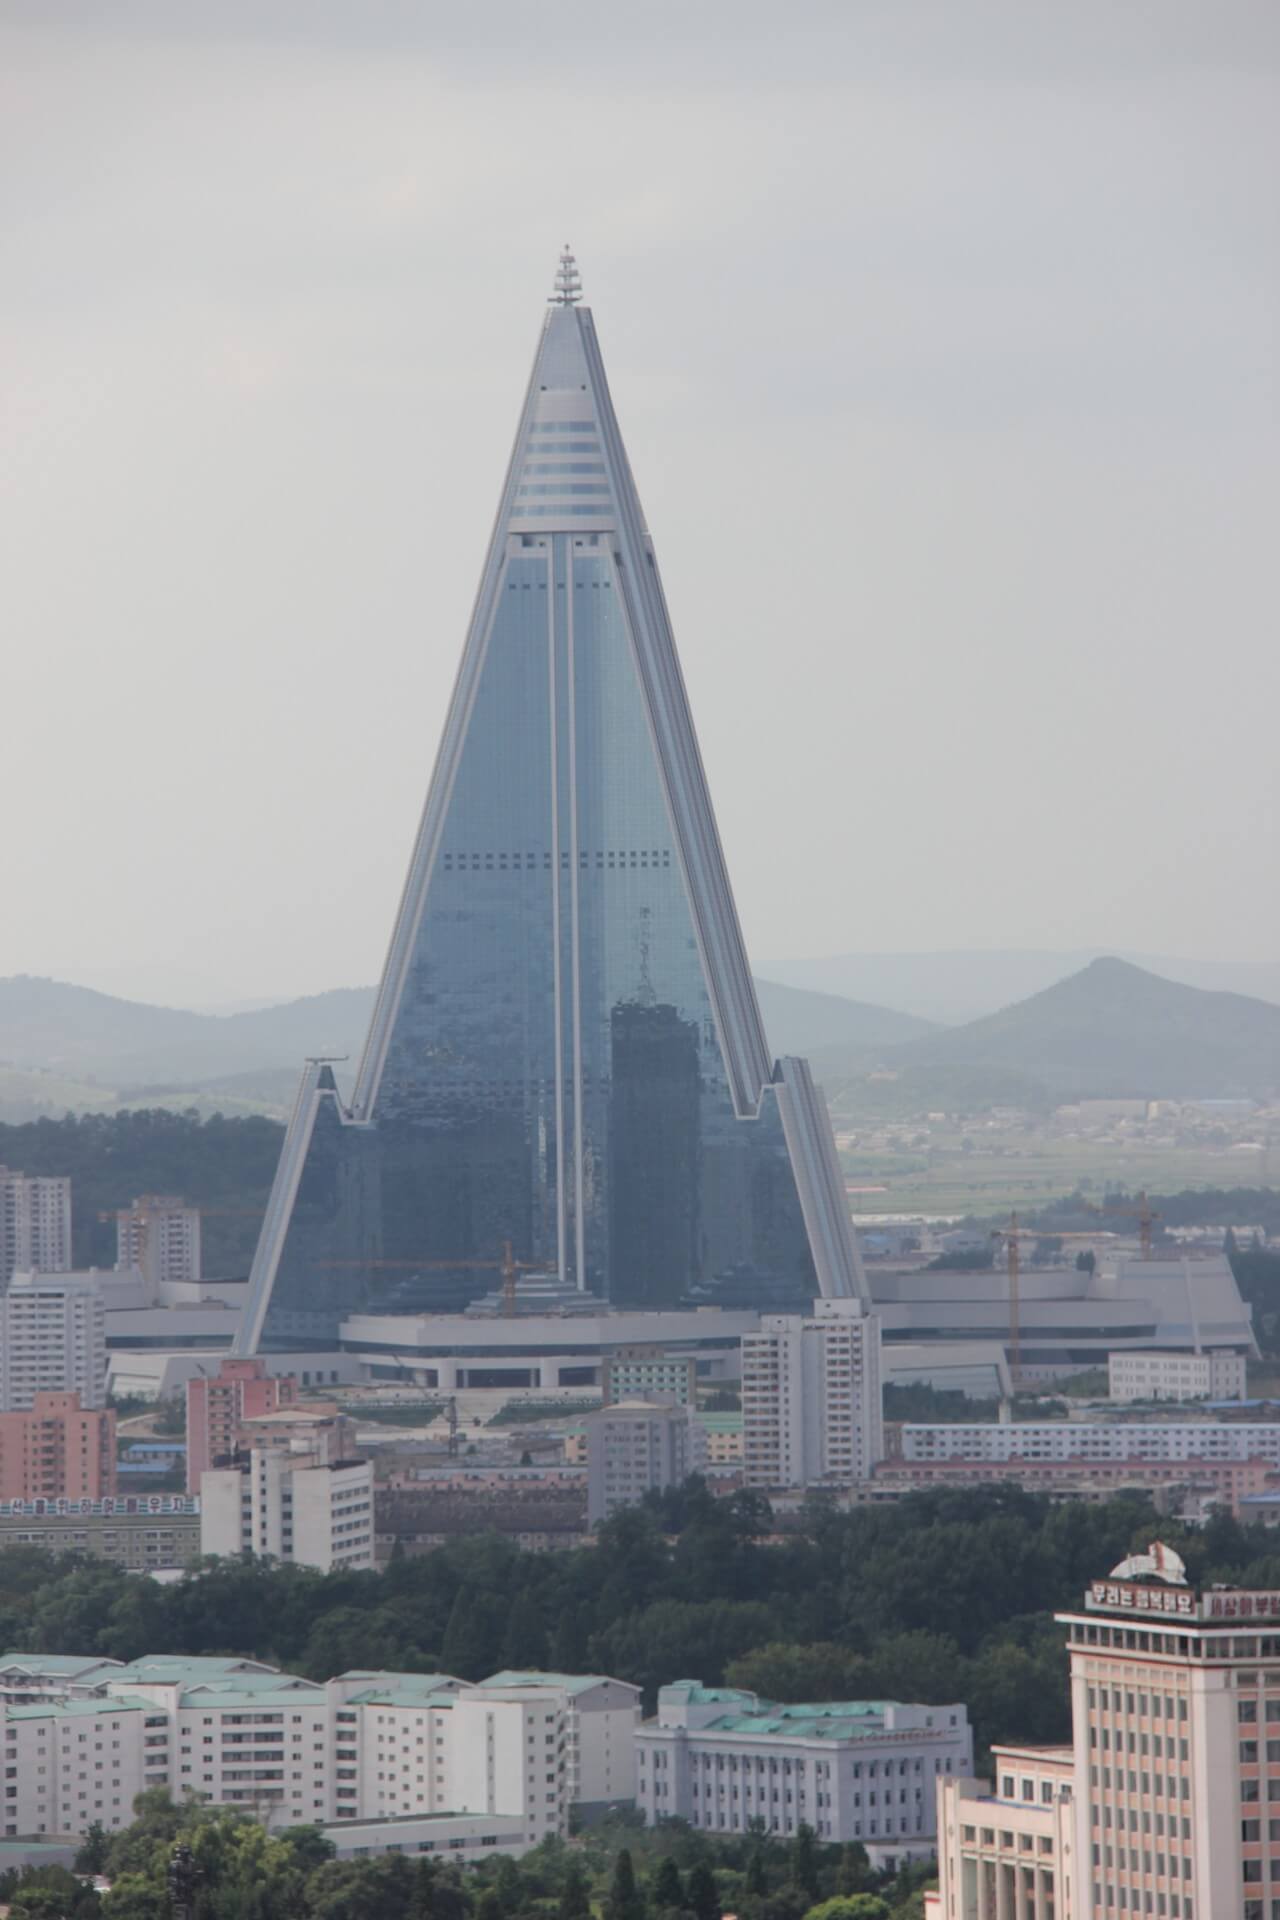 Ryugyong Hotel in Pyongyang (North Korea) - skyscrapper unfinished ...